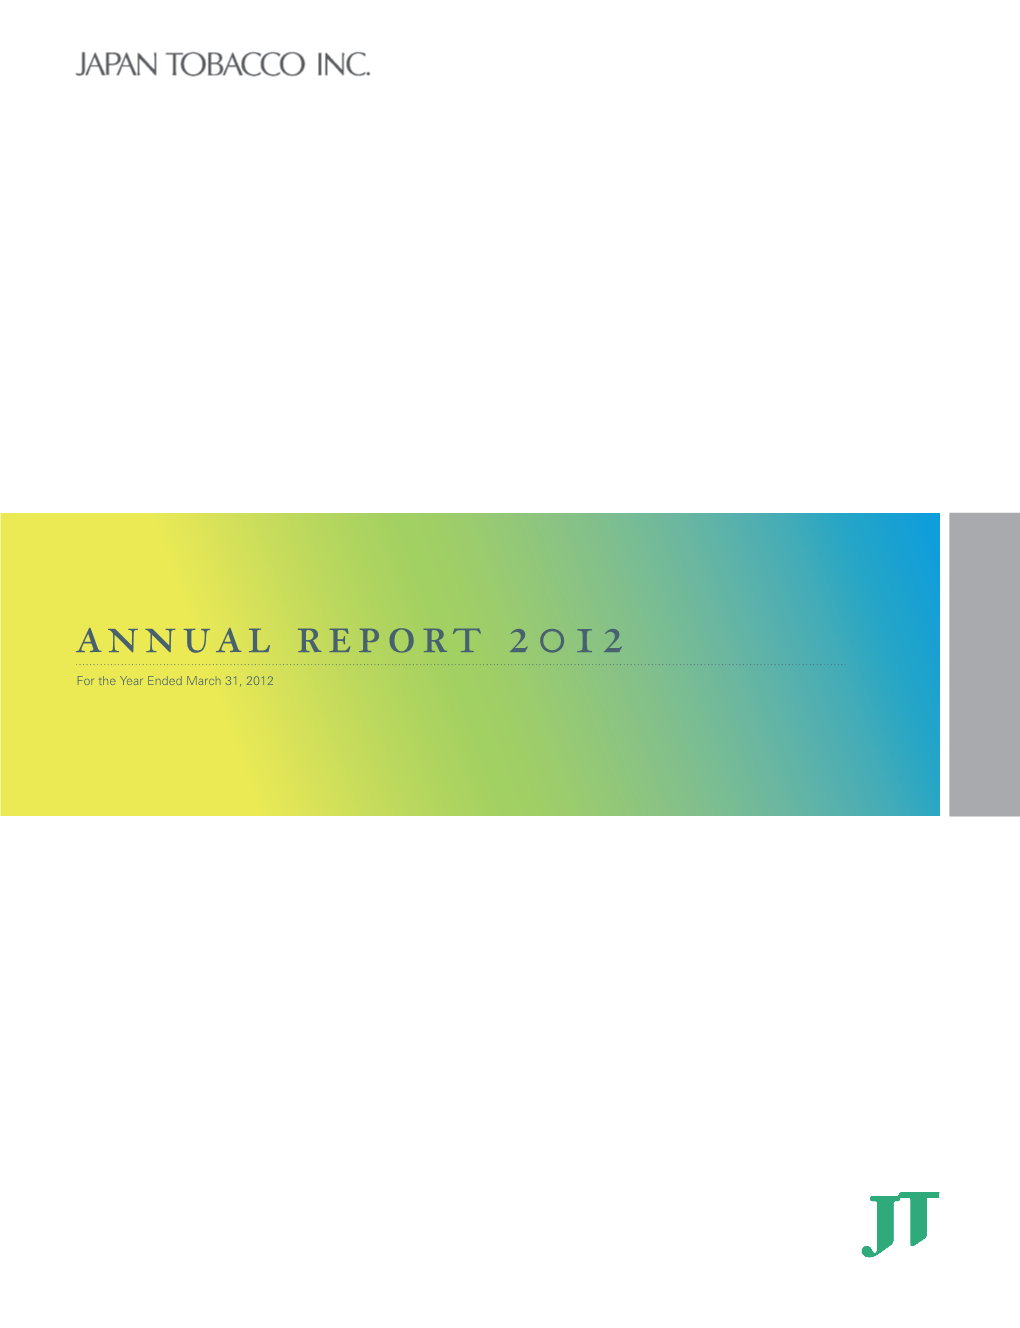 Annual Report 2012 for the Year Ended March 31, 2012 Contents